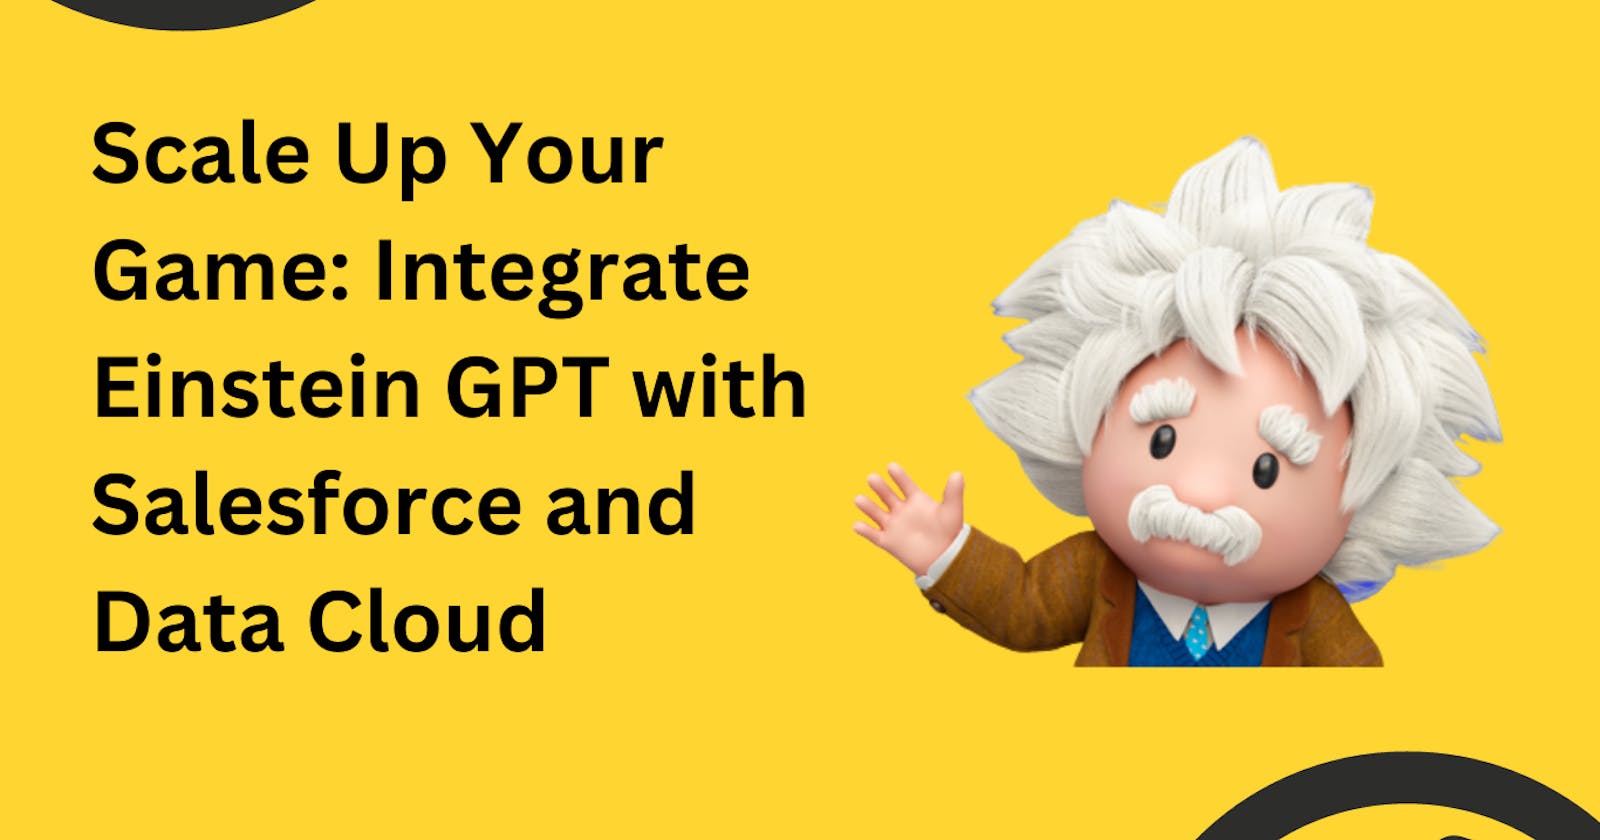 Scale Up Your Game: Integrate Einstein GPT with Salesforce and Data Cloud